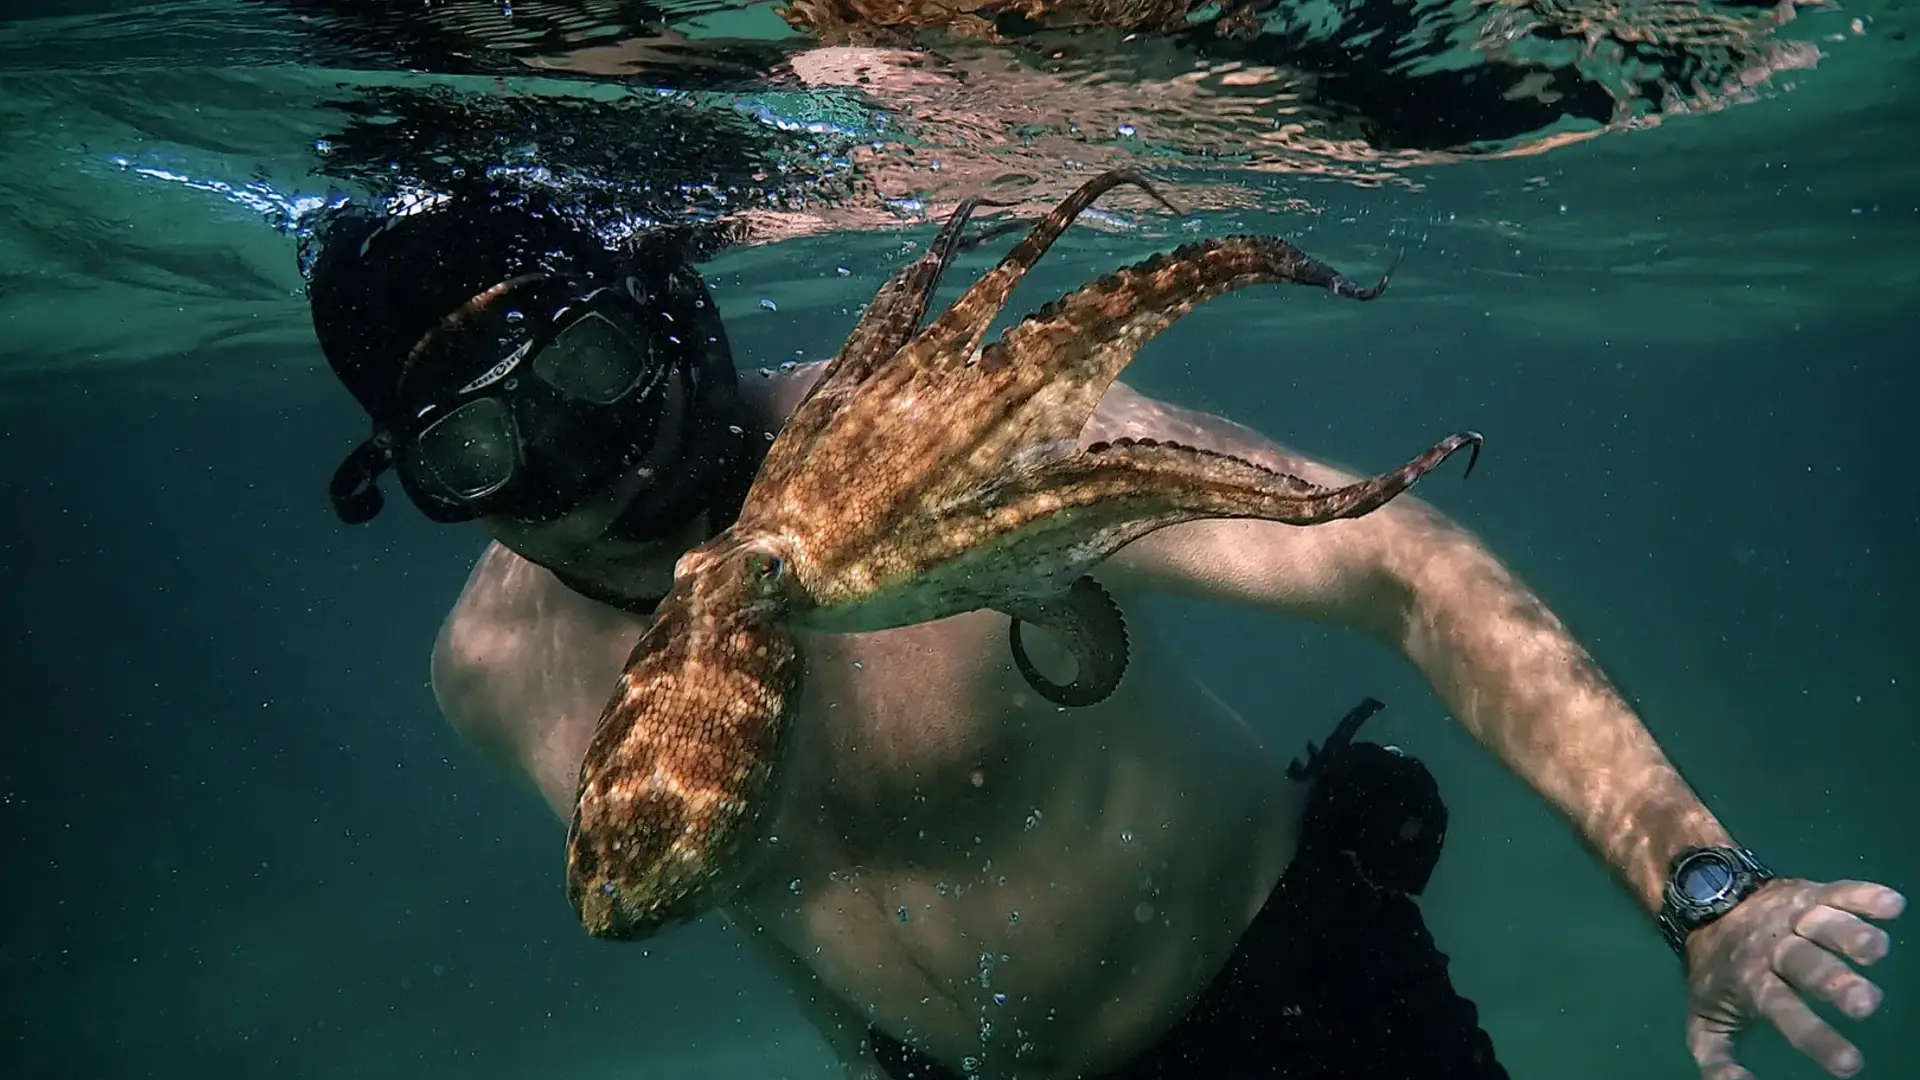 A man underwater with an octopus